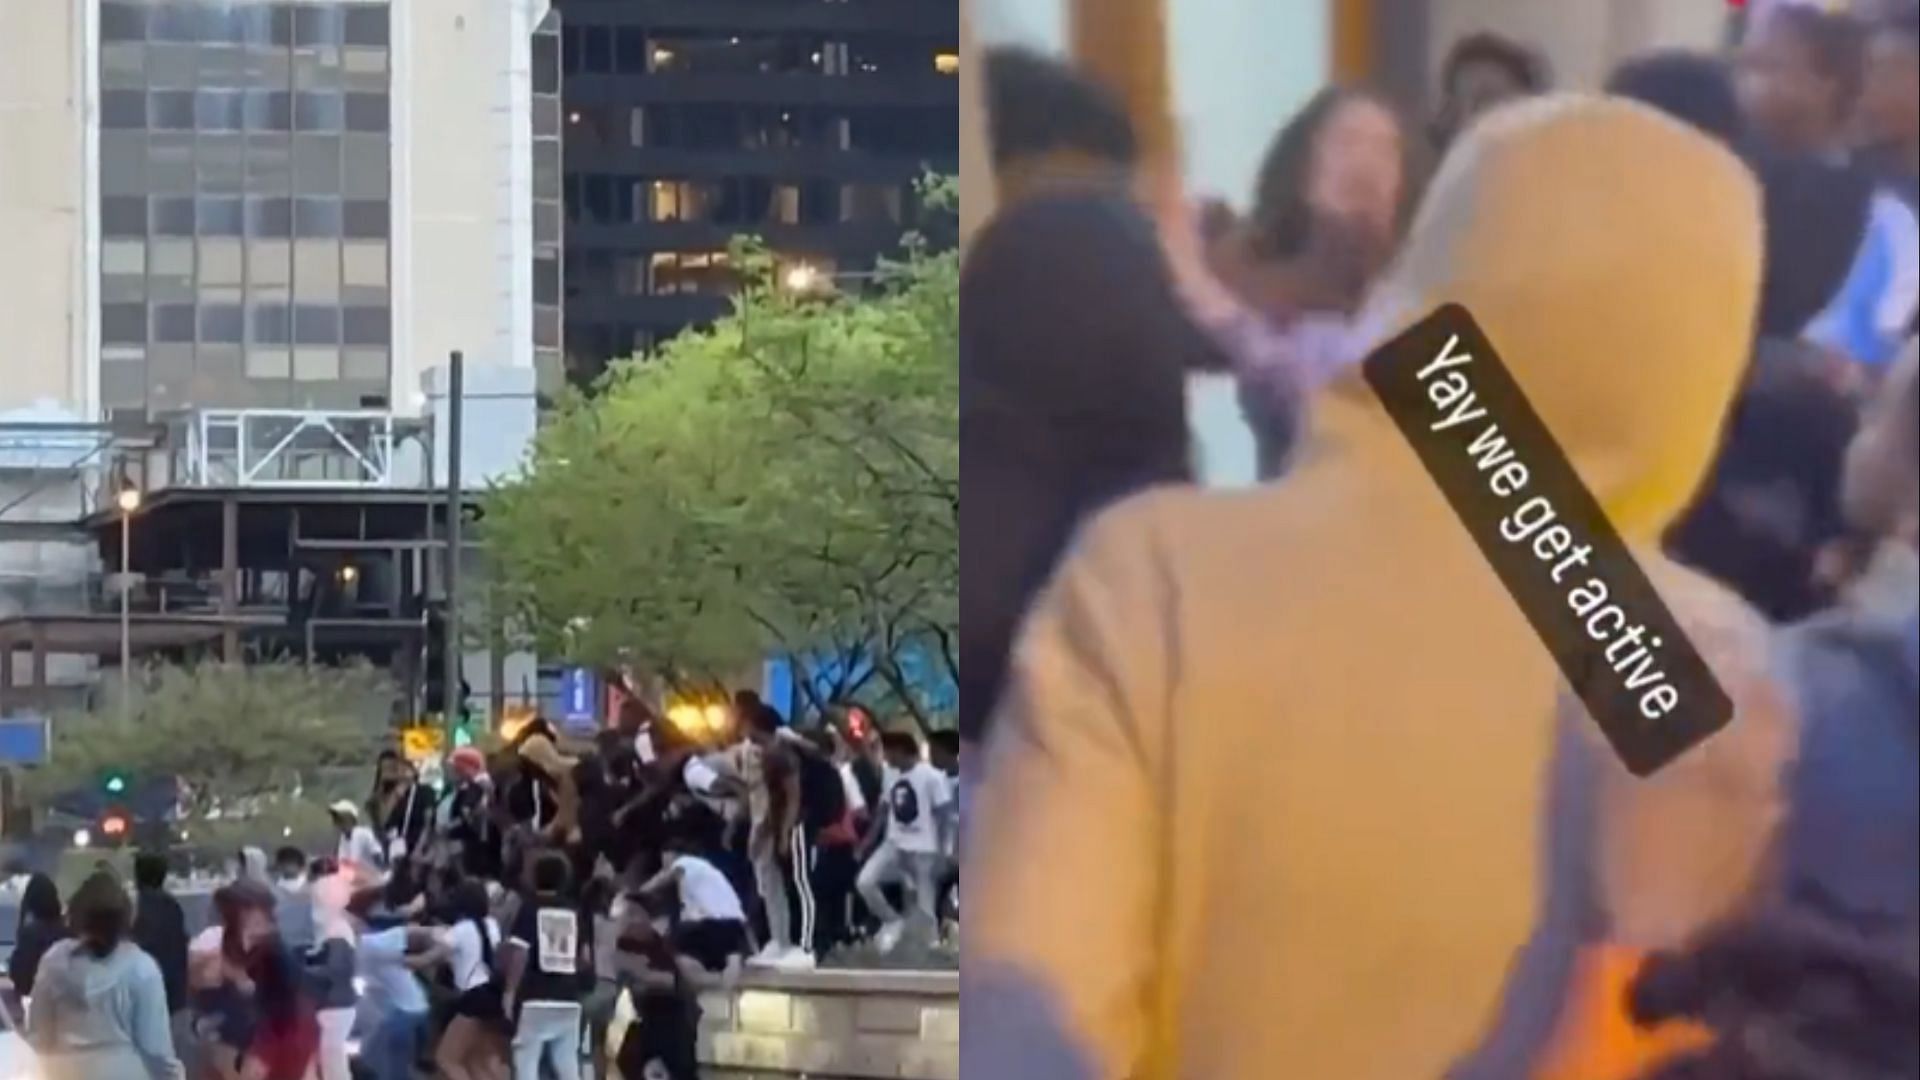 Viral video of women getting beaten by a teen mob in Chicago sparks outrage online. (Image via Twitter/@freedom4UUU, @EndWokeness)